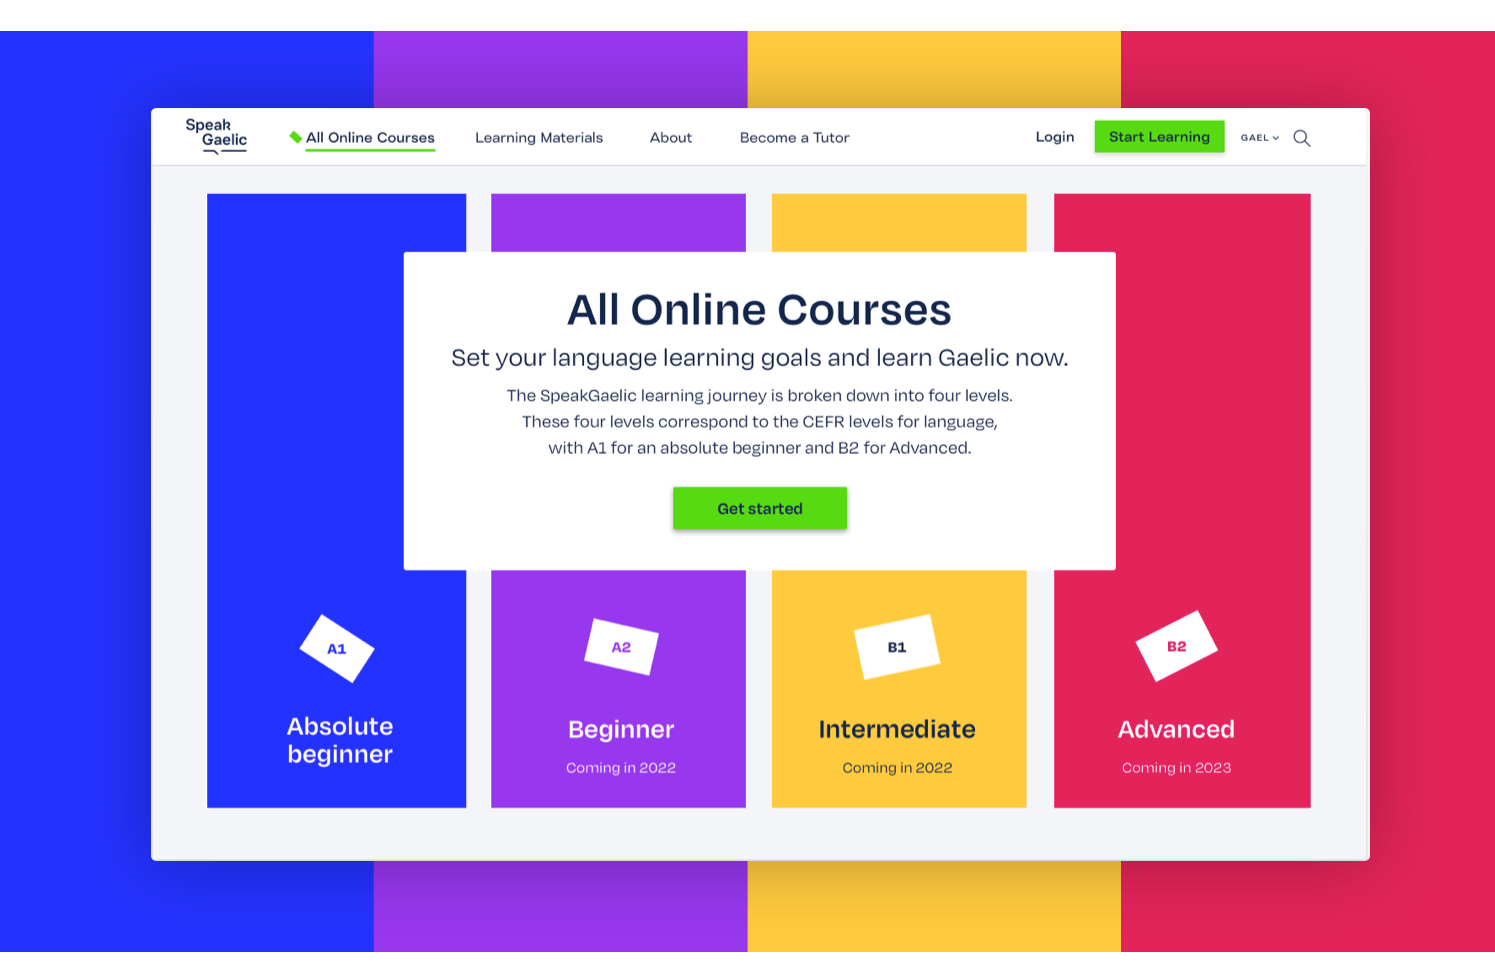 A landing page is shown giving the user access to “All Online Courses” of SpeakGaelic. It encourages users to “Set your learning goals and learn Gaelic now”.